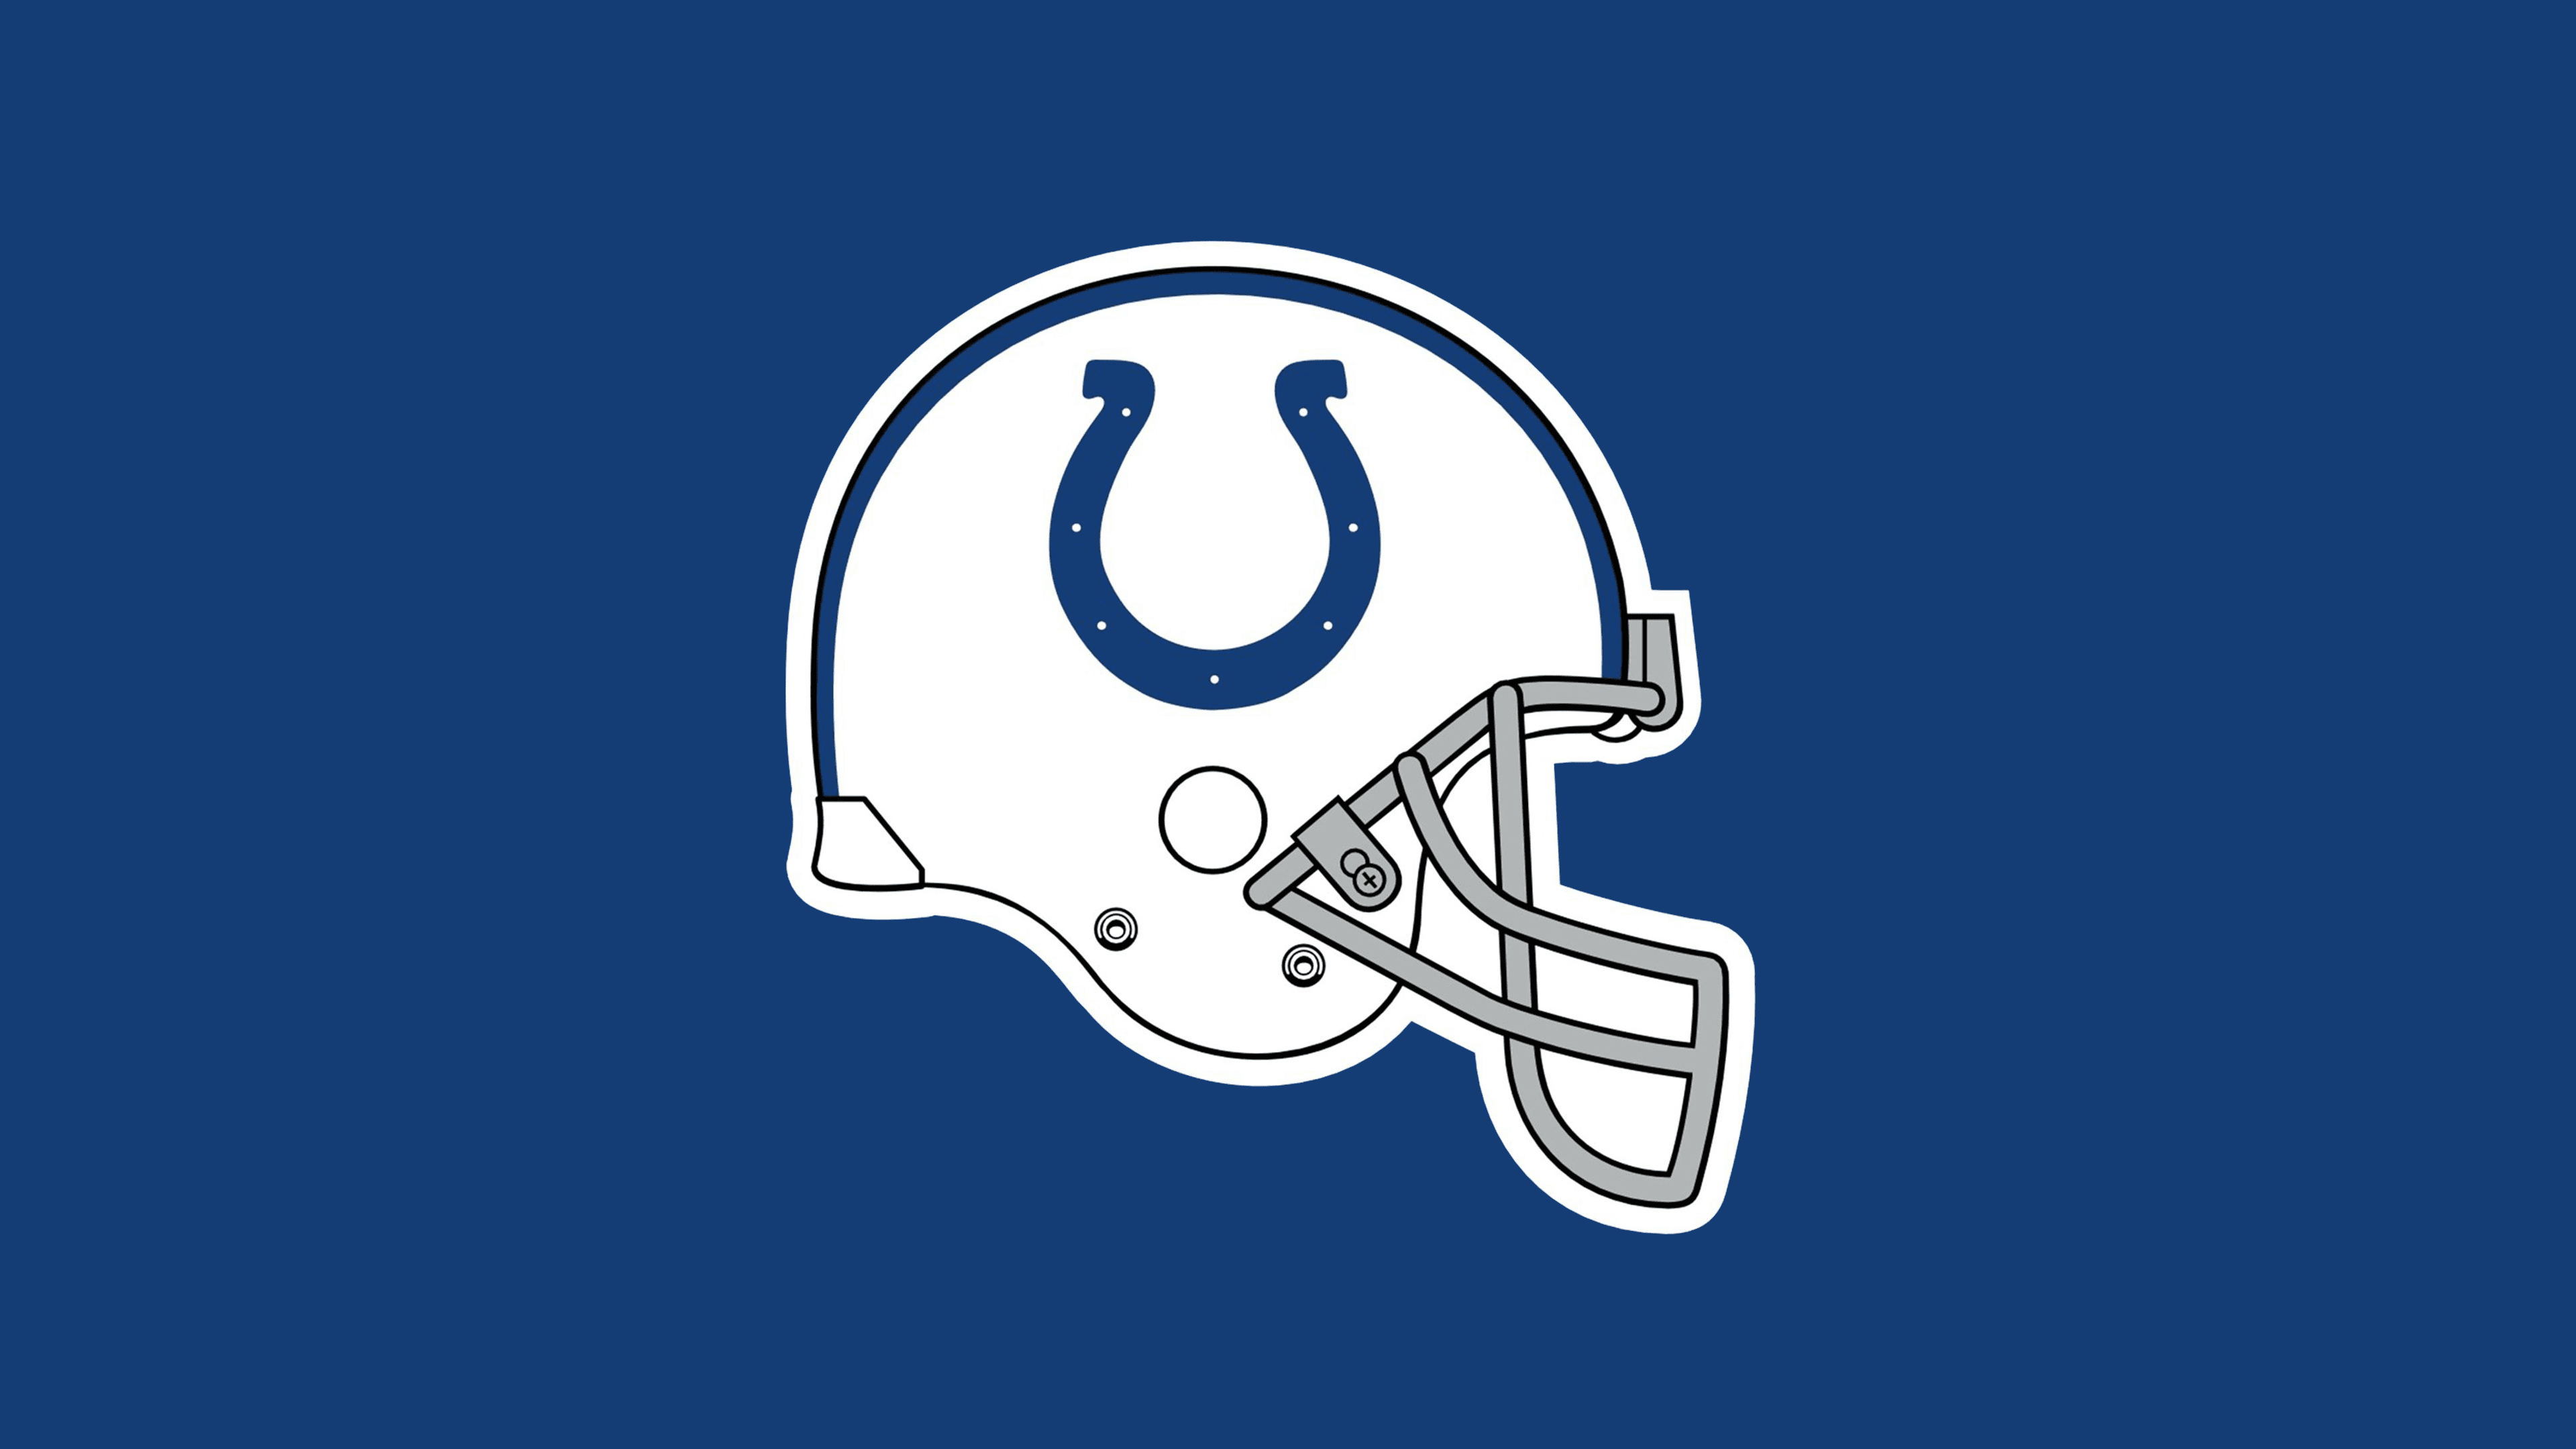 Indianapolis Colts Logo and sign, new logo meaning and history, PNG, SVG